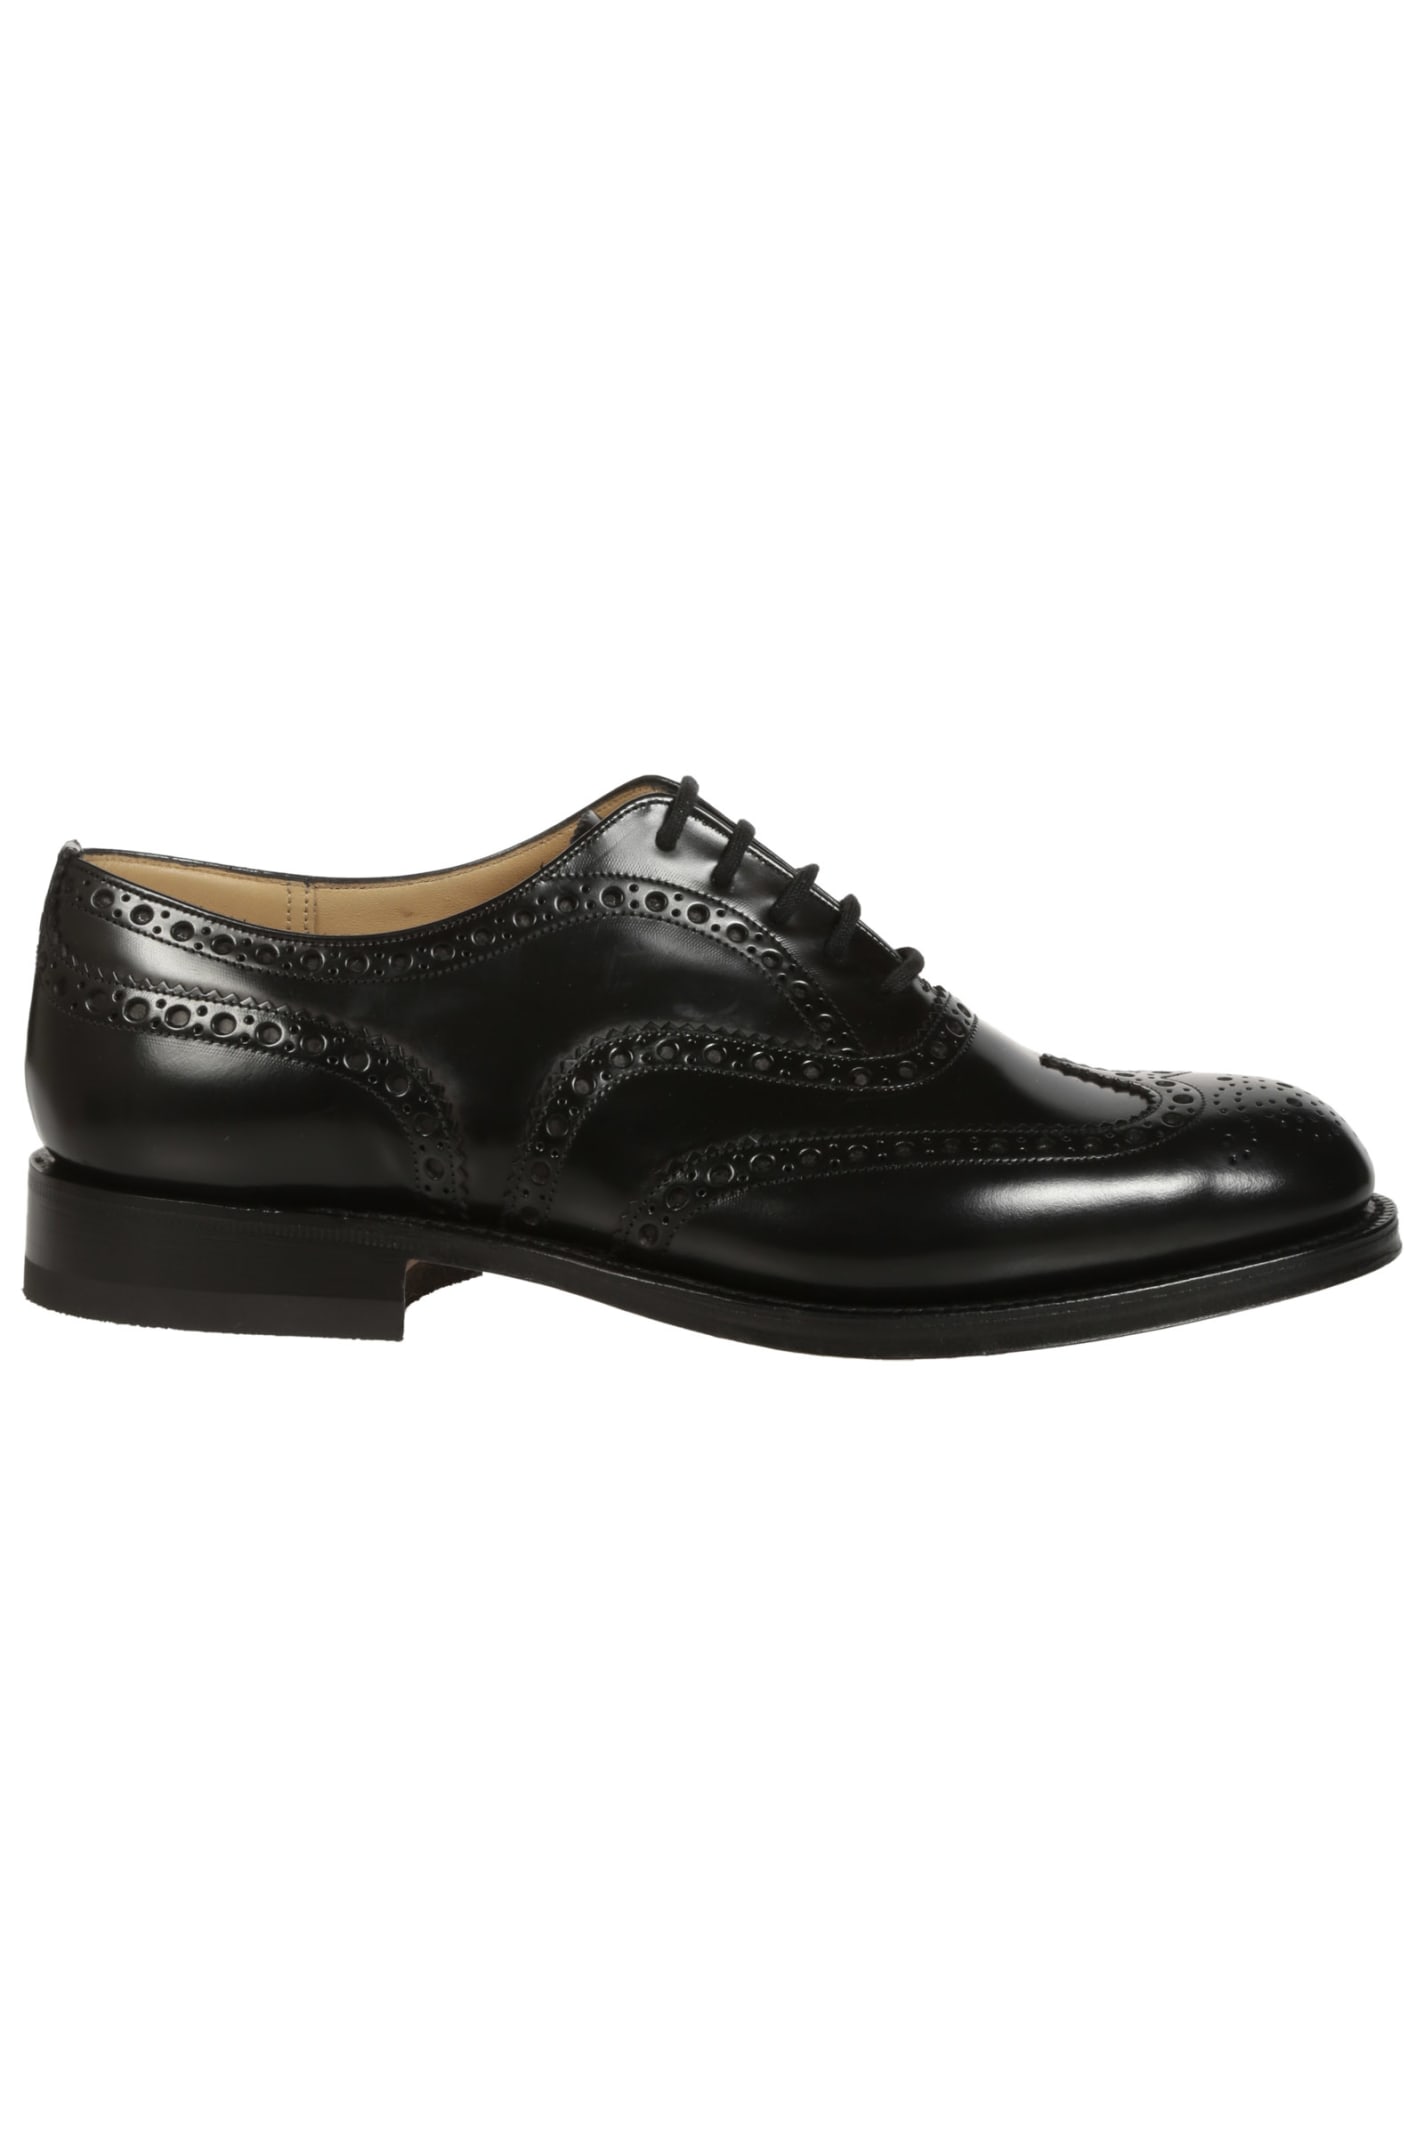 Church's Burwood Lace-up Shoes